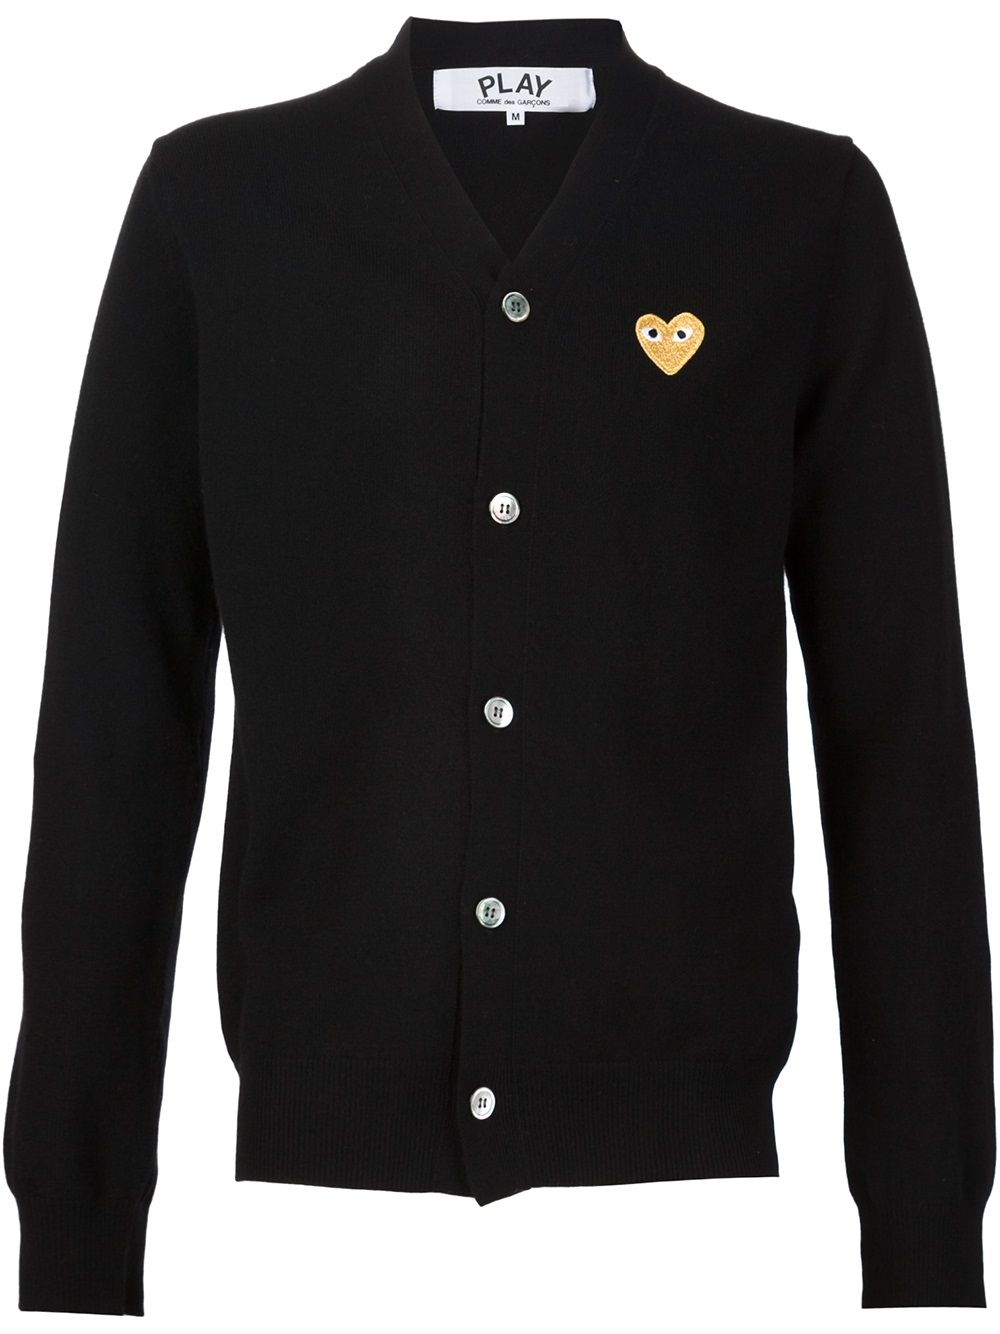 Image 1 of Comme Des Garçons Play embroidered heart cardigan